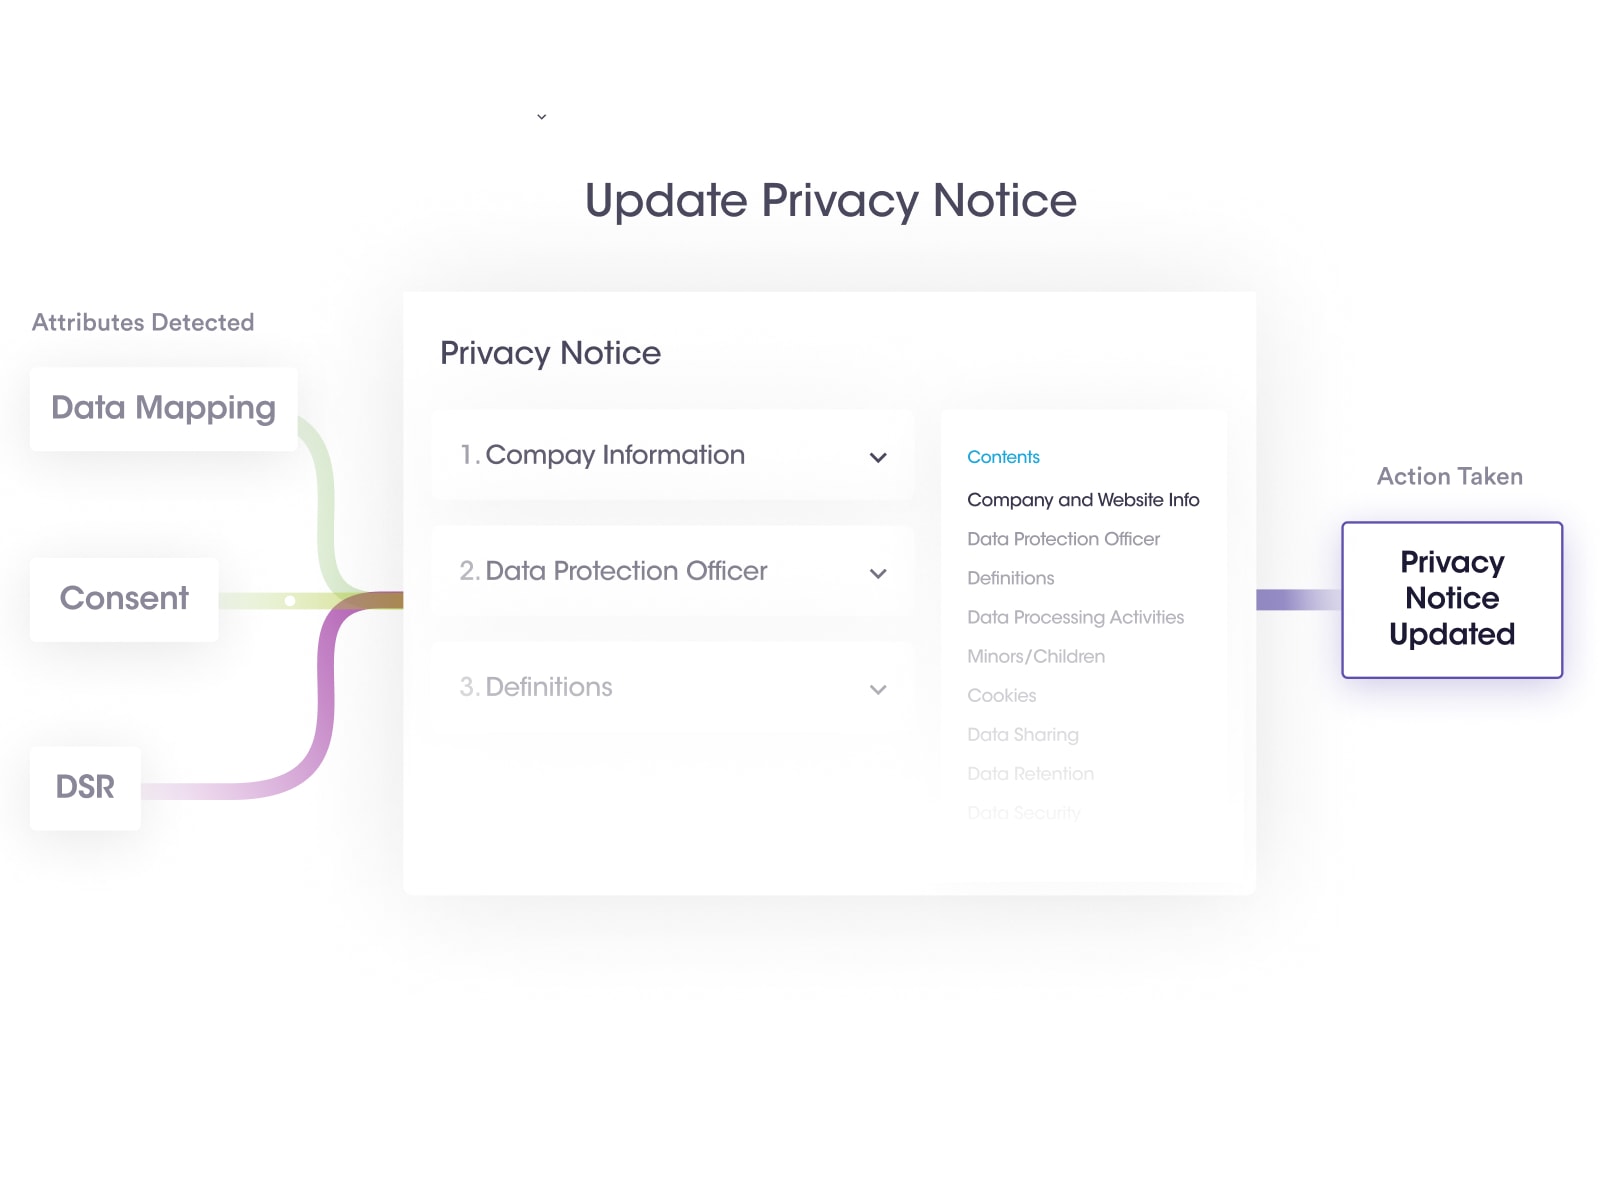 Dynamically Update Privacy Policies and Notices